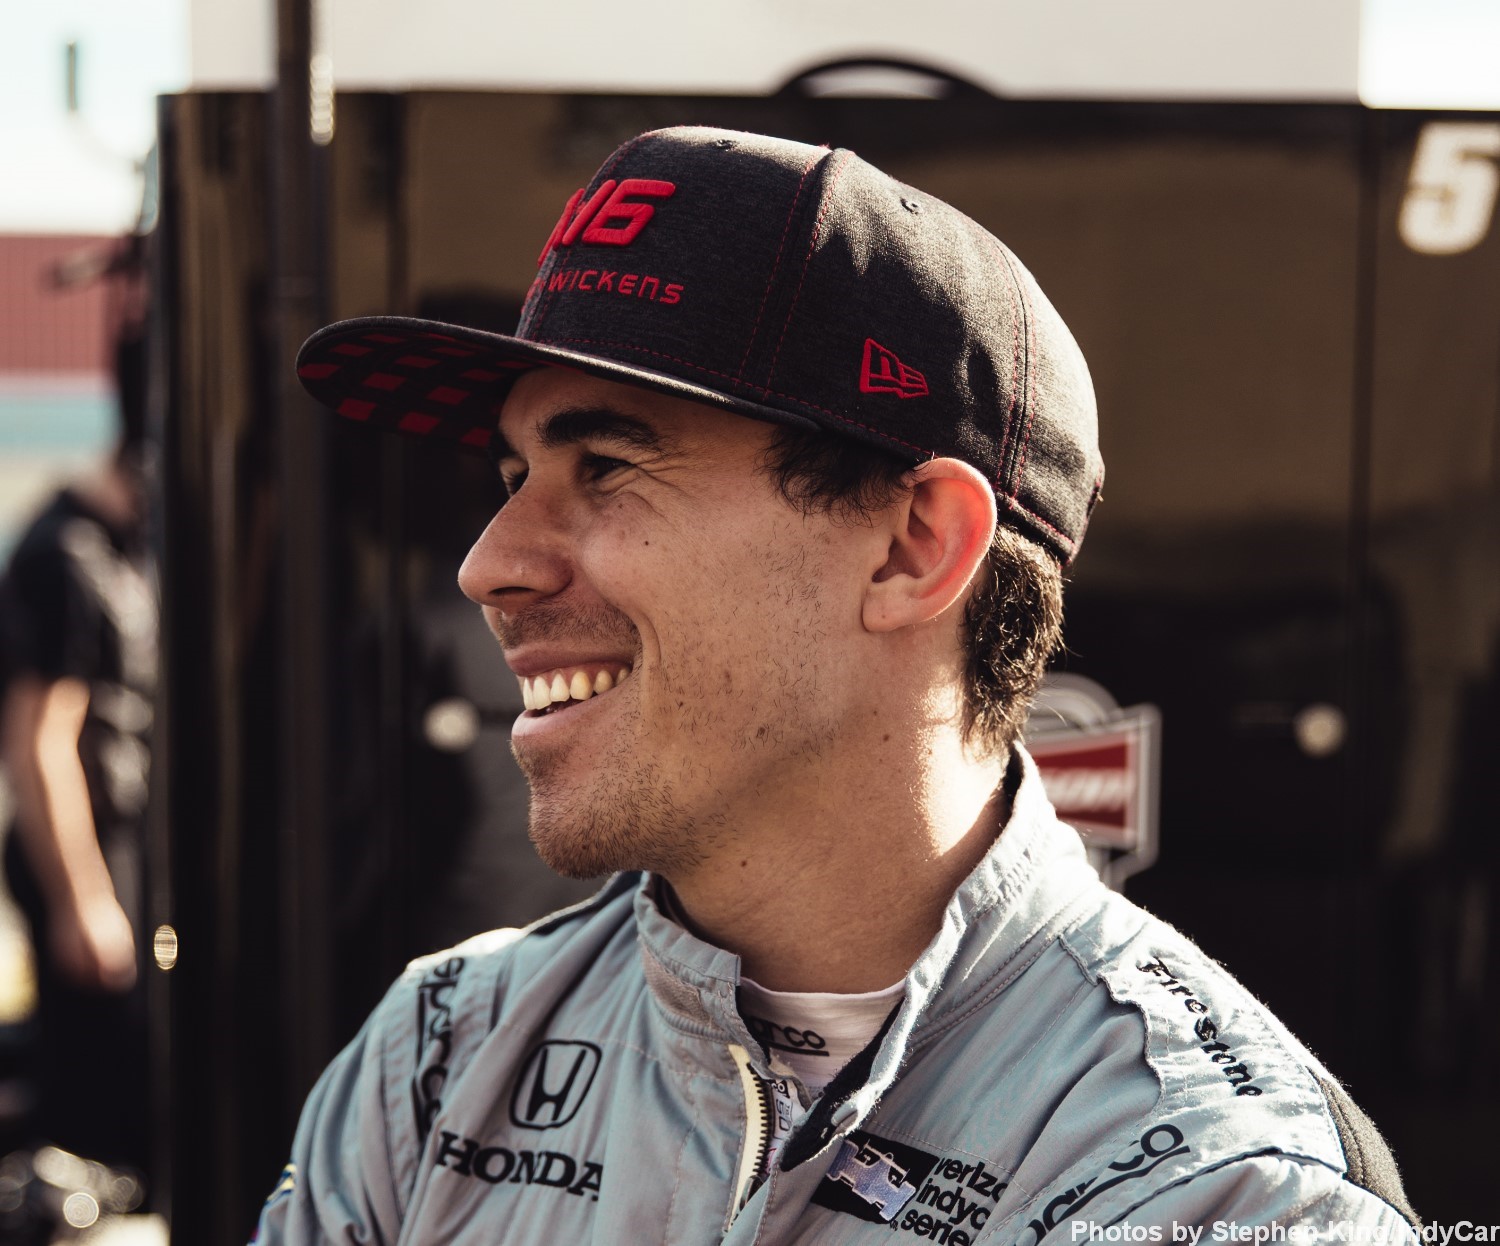 Our heart goes out to now confirmed paraplegic Robert Wickens. When is IndyCar going to do something about the catch fences?